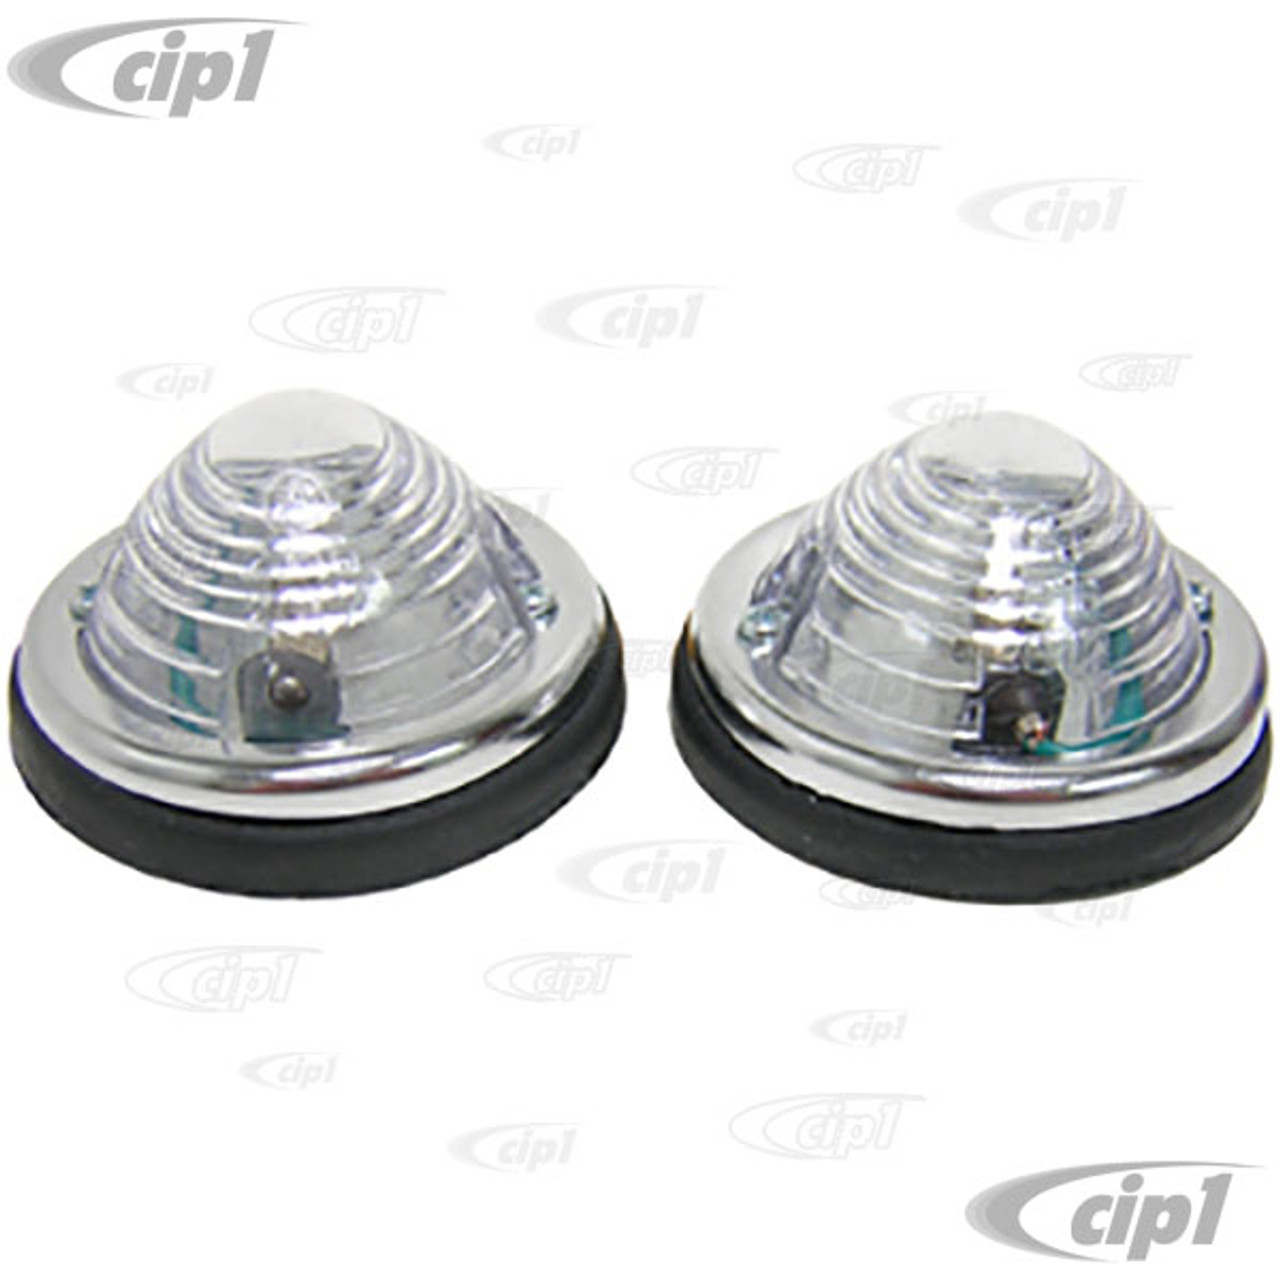 C21-0670 - LUCAS STYLE CAL-LOOK SIGNAL ASSEMBLY - ROUND WITH CHROME - WHITE LENS - SOLD PAIR